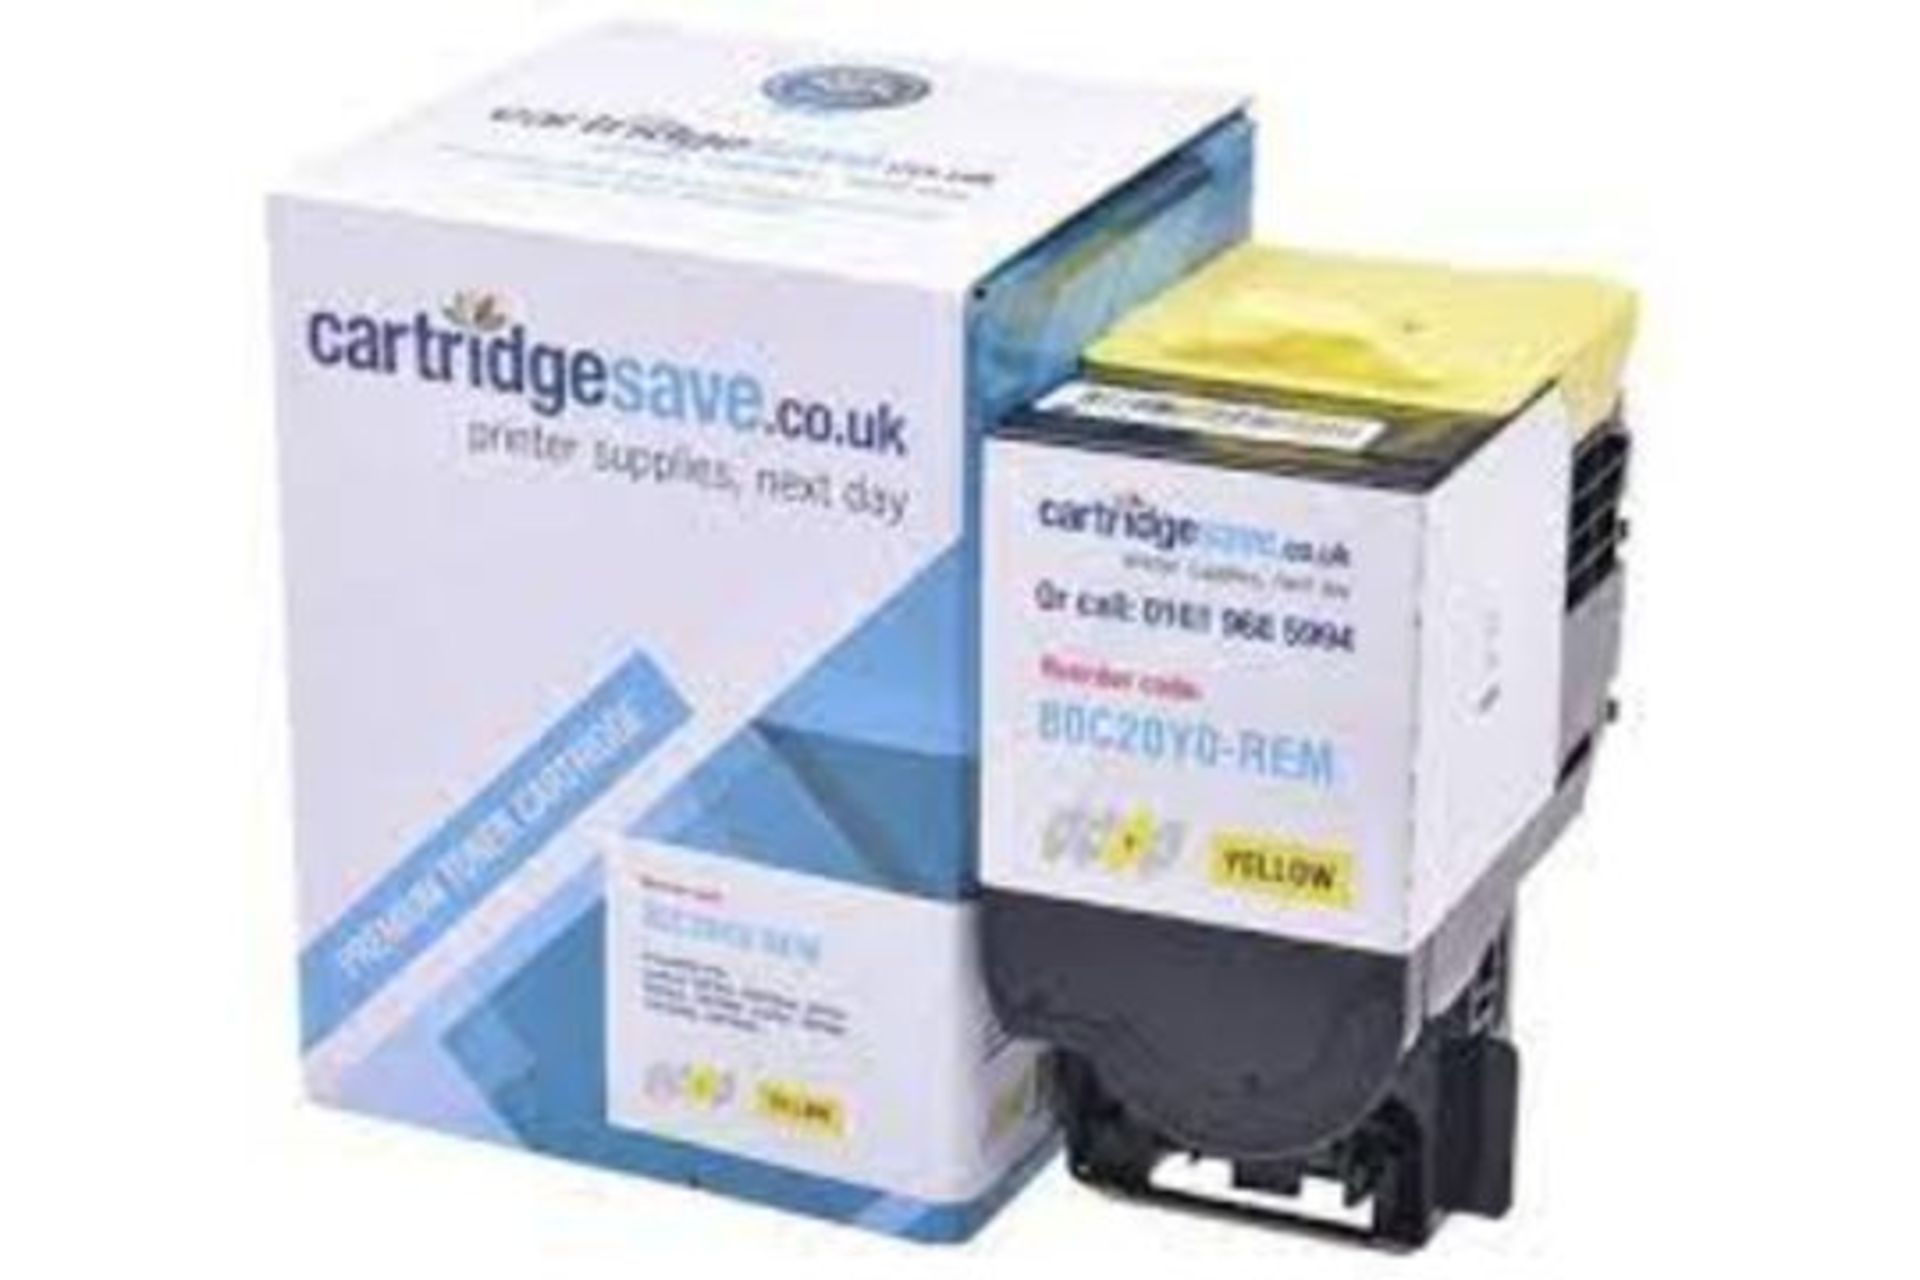 MAJOR LIQUIDATION OF CIRCA 16000 PRINTER CARTRIDGES/TONERS COMPATIBLE WITH BROTHER, EPSON, HP, CANON - Image 8 of 9